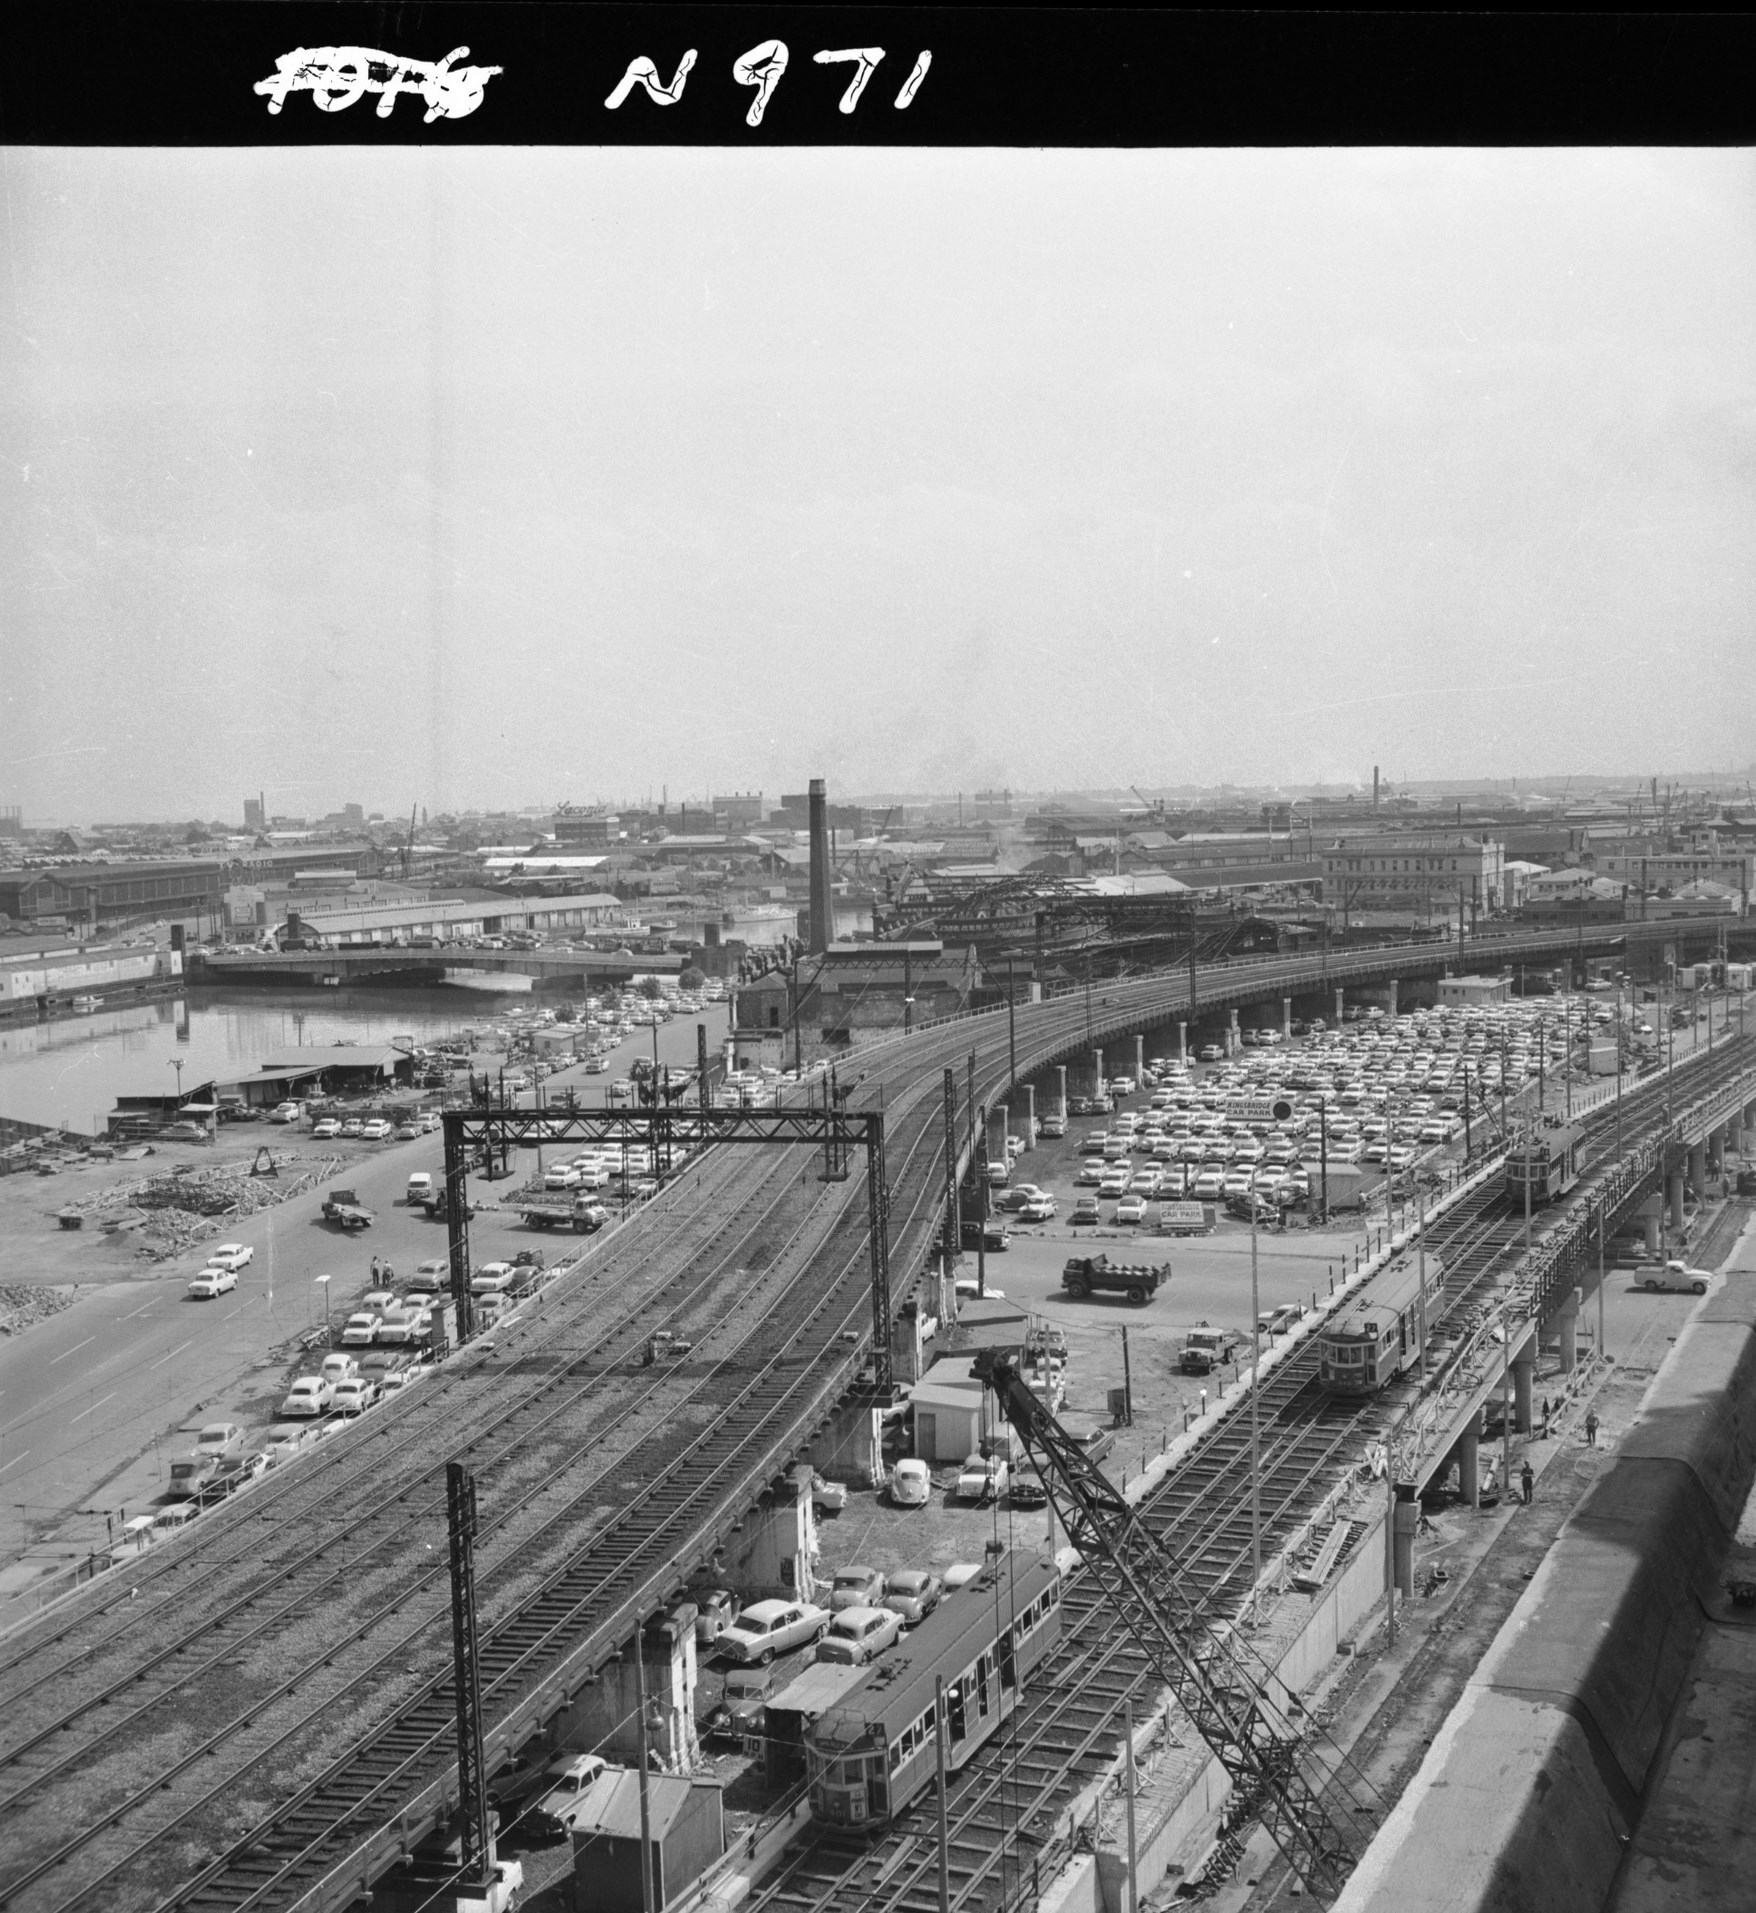 N971 Image showing an aerial view of King Street bridge, viaduct and ...